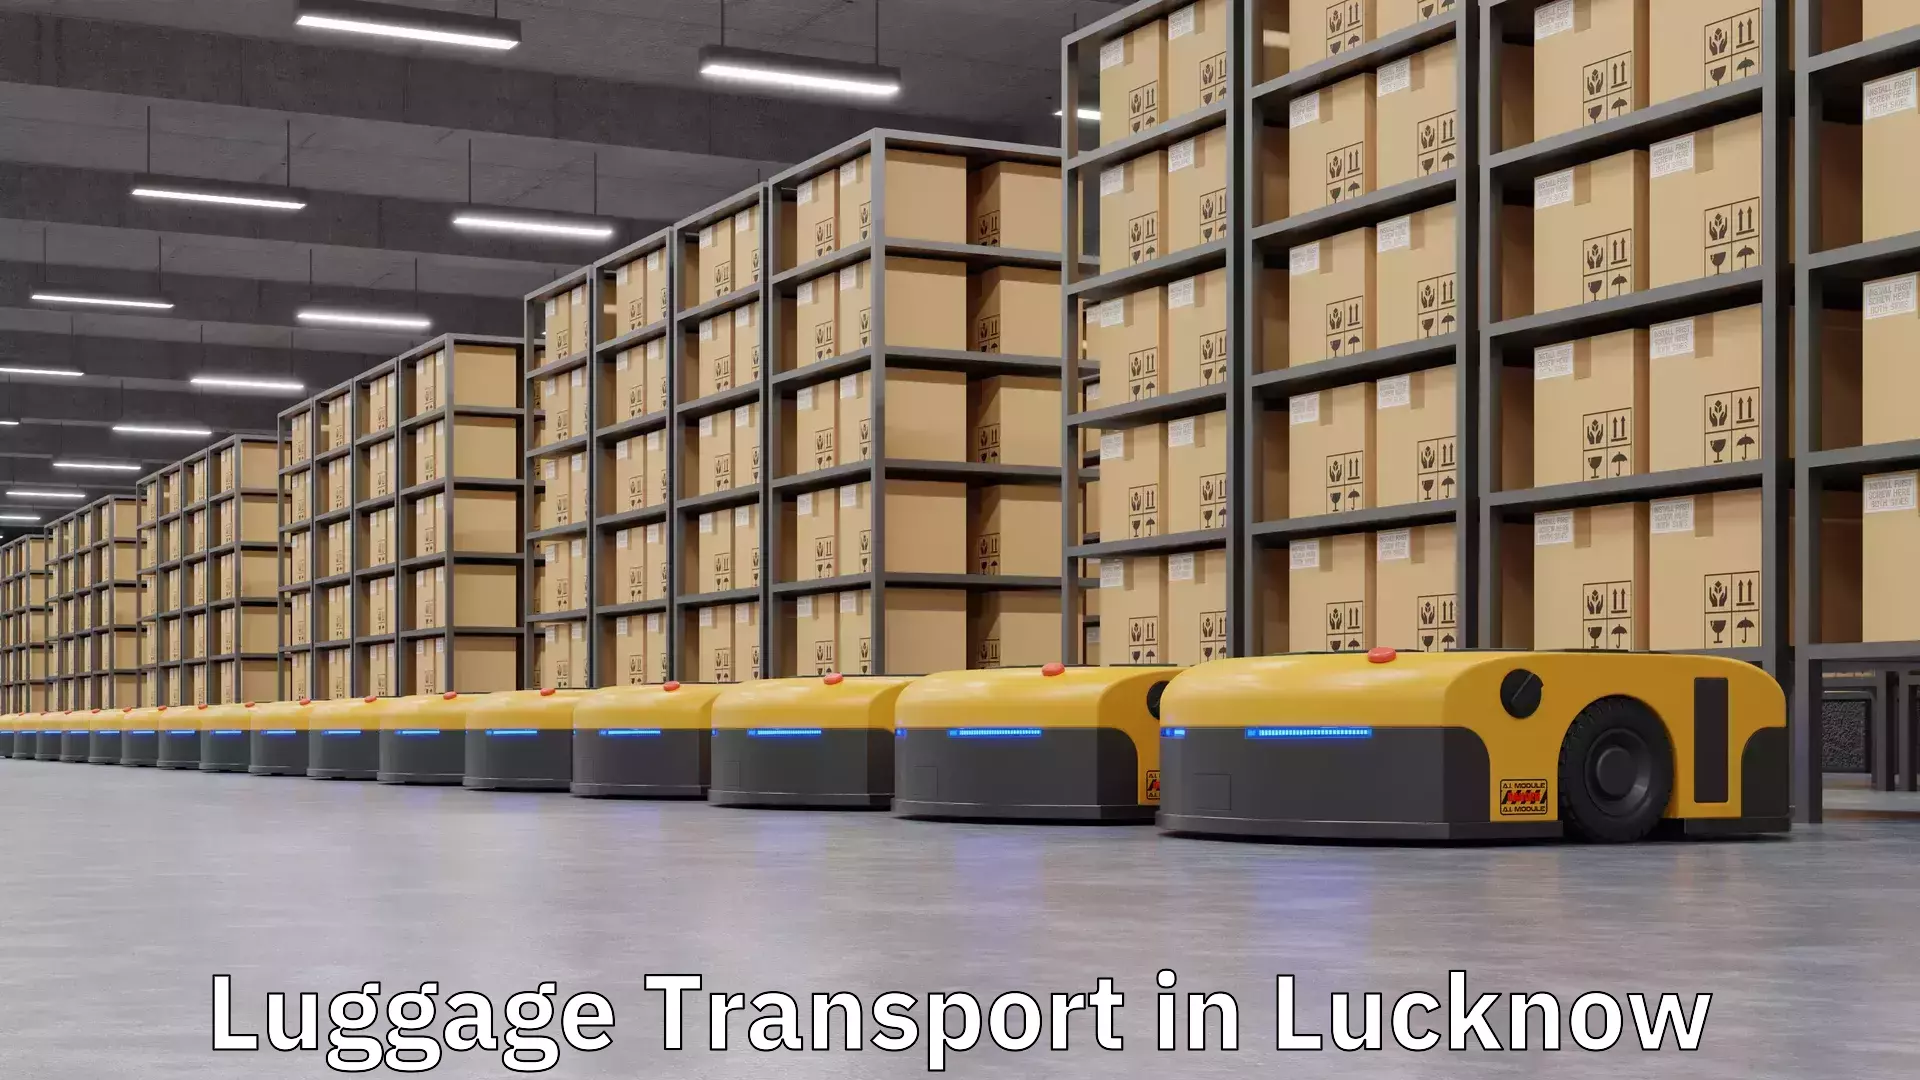 Nationwide luggage transport in Lucknow